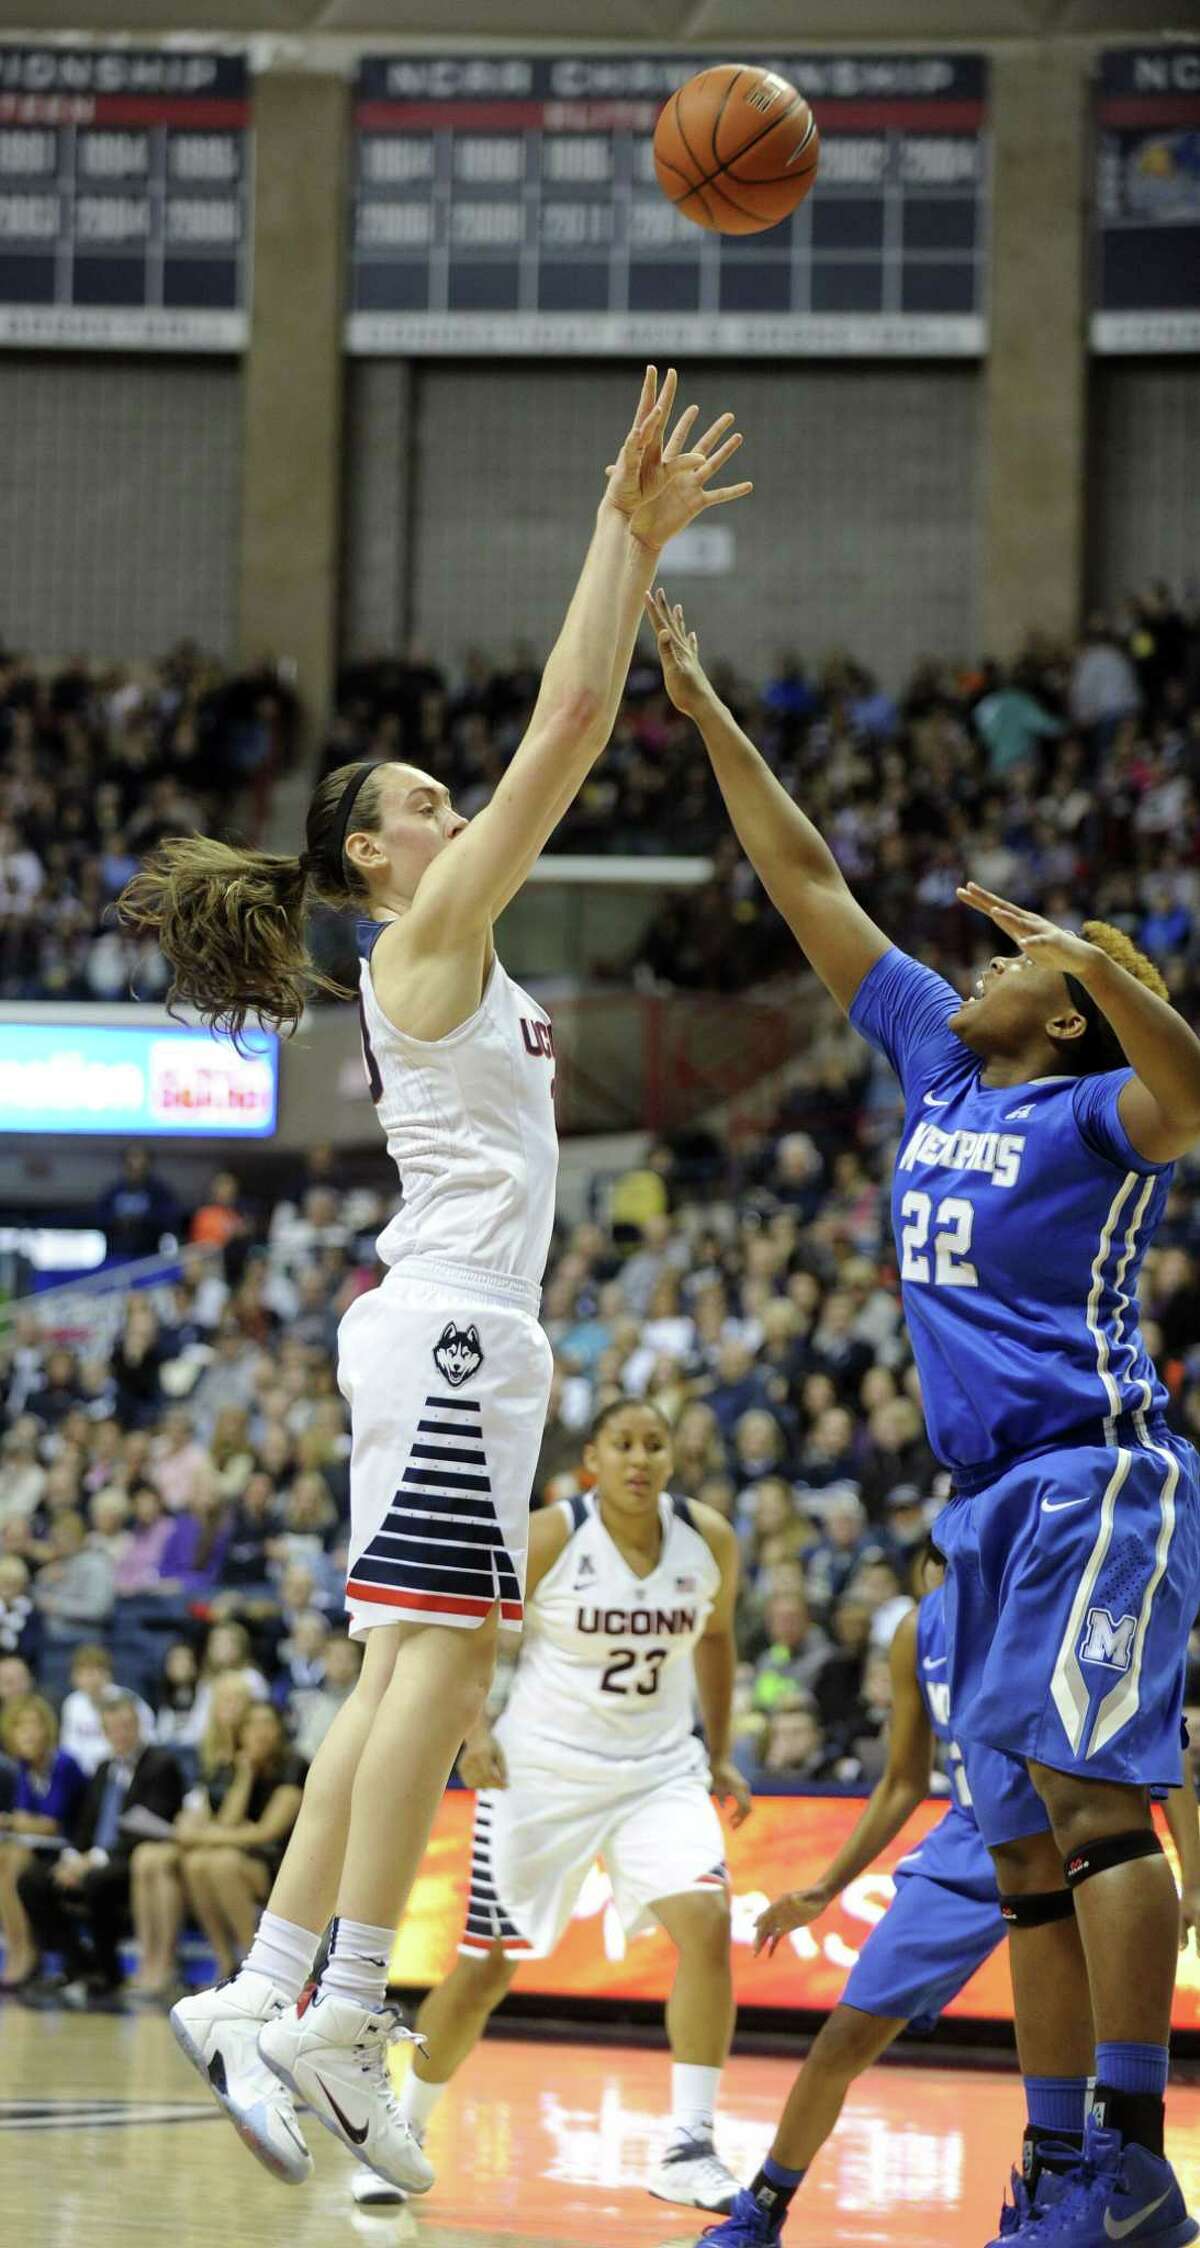 Connecticut's Breanna Stewart (30) shoots over Memphis' Brianna Wright (22) during the first half of an NCAA college basketball game in Storrs, Conn., on Saturday, Feb. 28, 2015. (AP Photo/Fred Beckham)